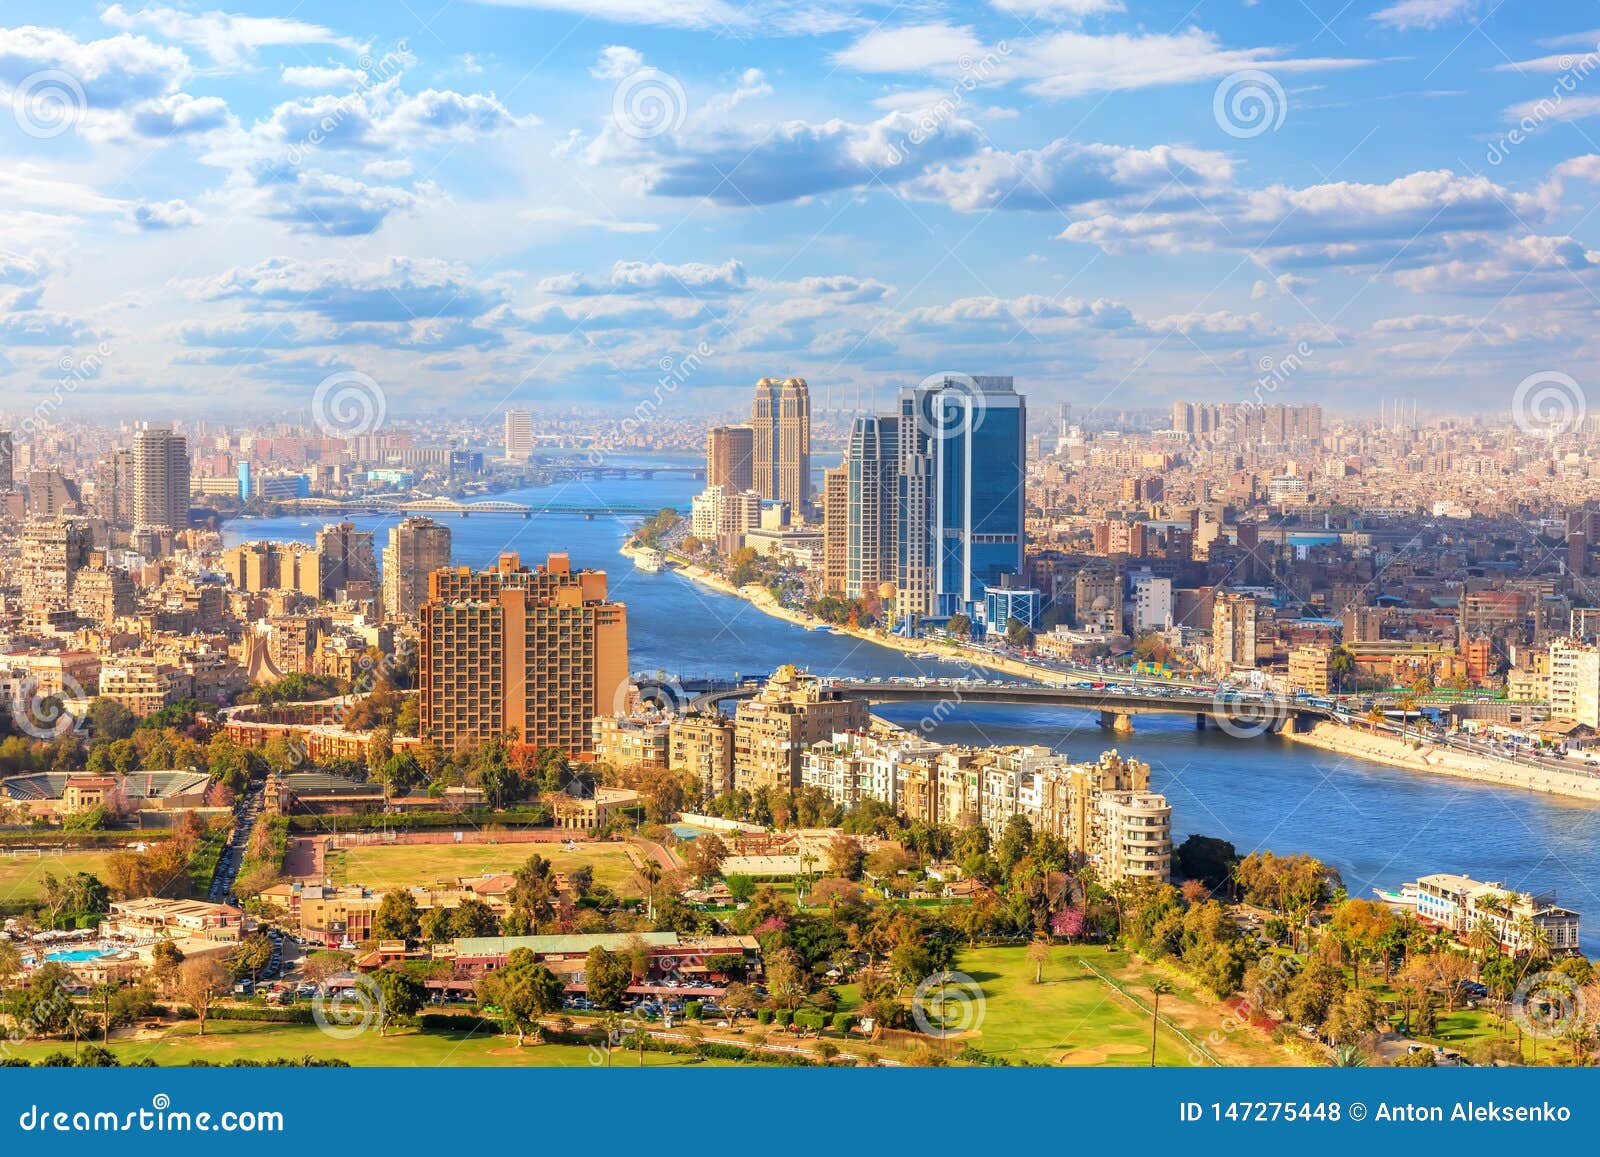 beautiful view of cairo and the nile from above, egypt